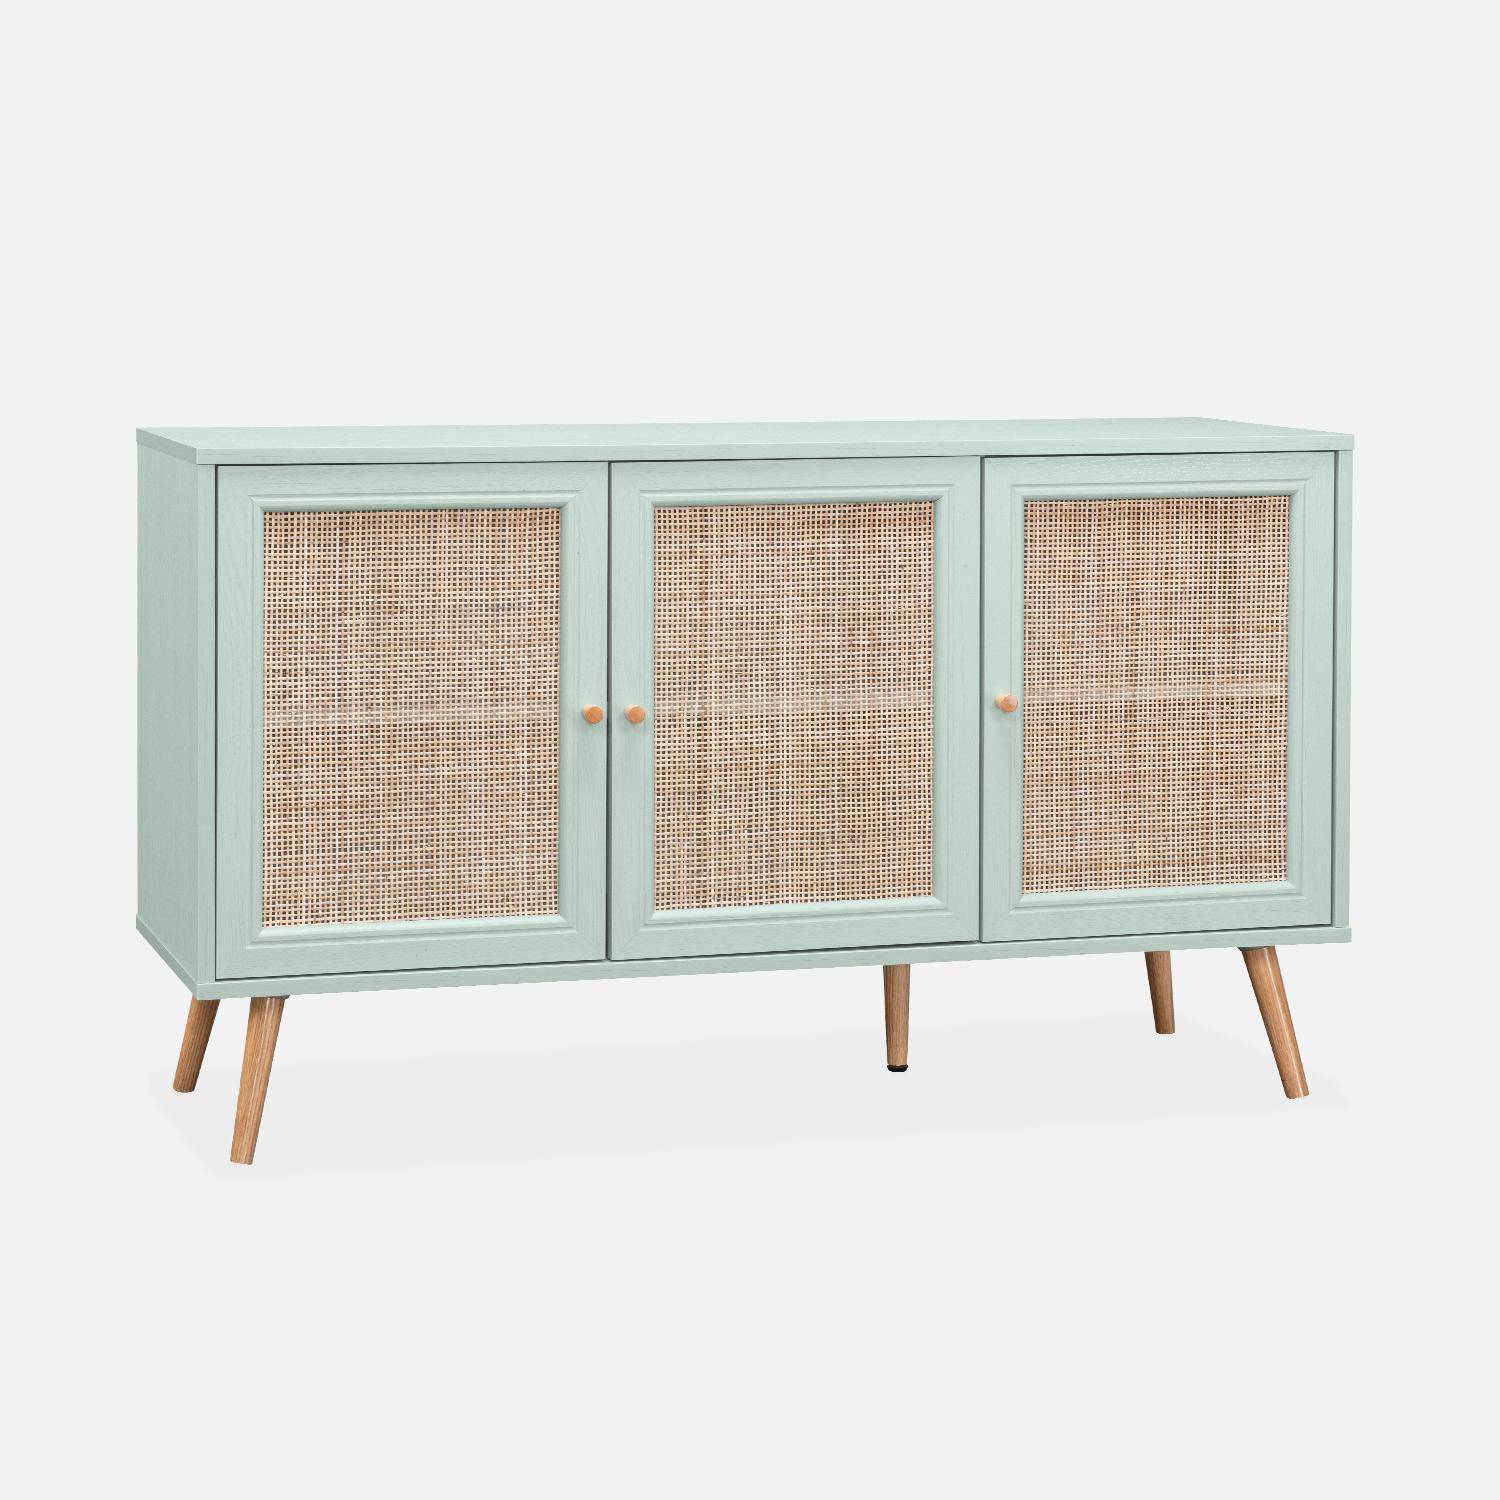 Wooden and cane rattan detail sideboard with 3 doors, 2 shelves, Scandi-style legs, 120x39x70cm - Boheme - Pastel Green,sweeek,Photo3